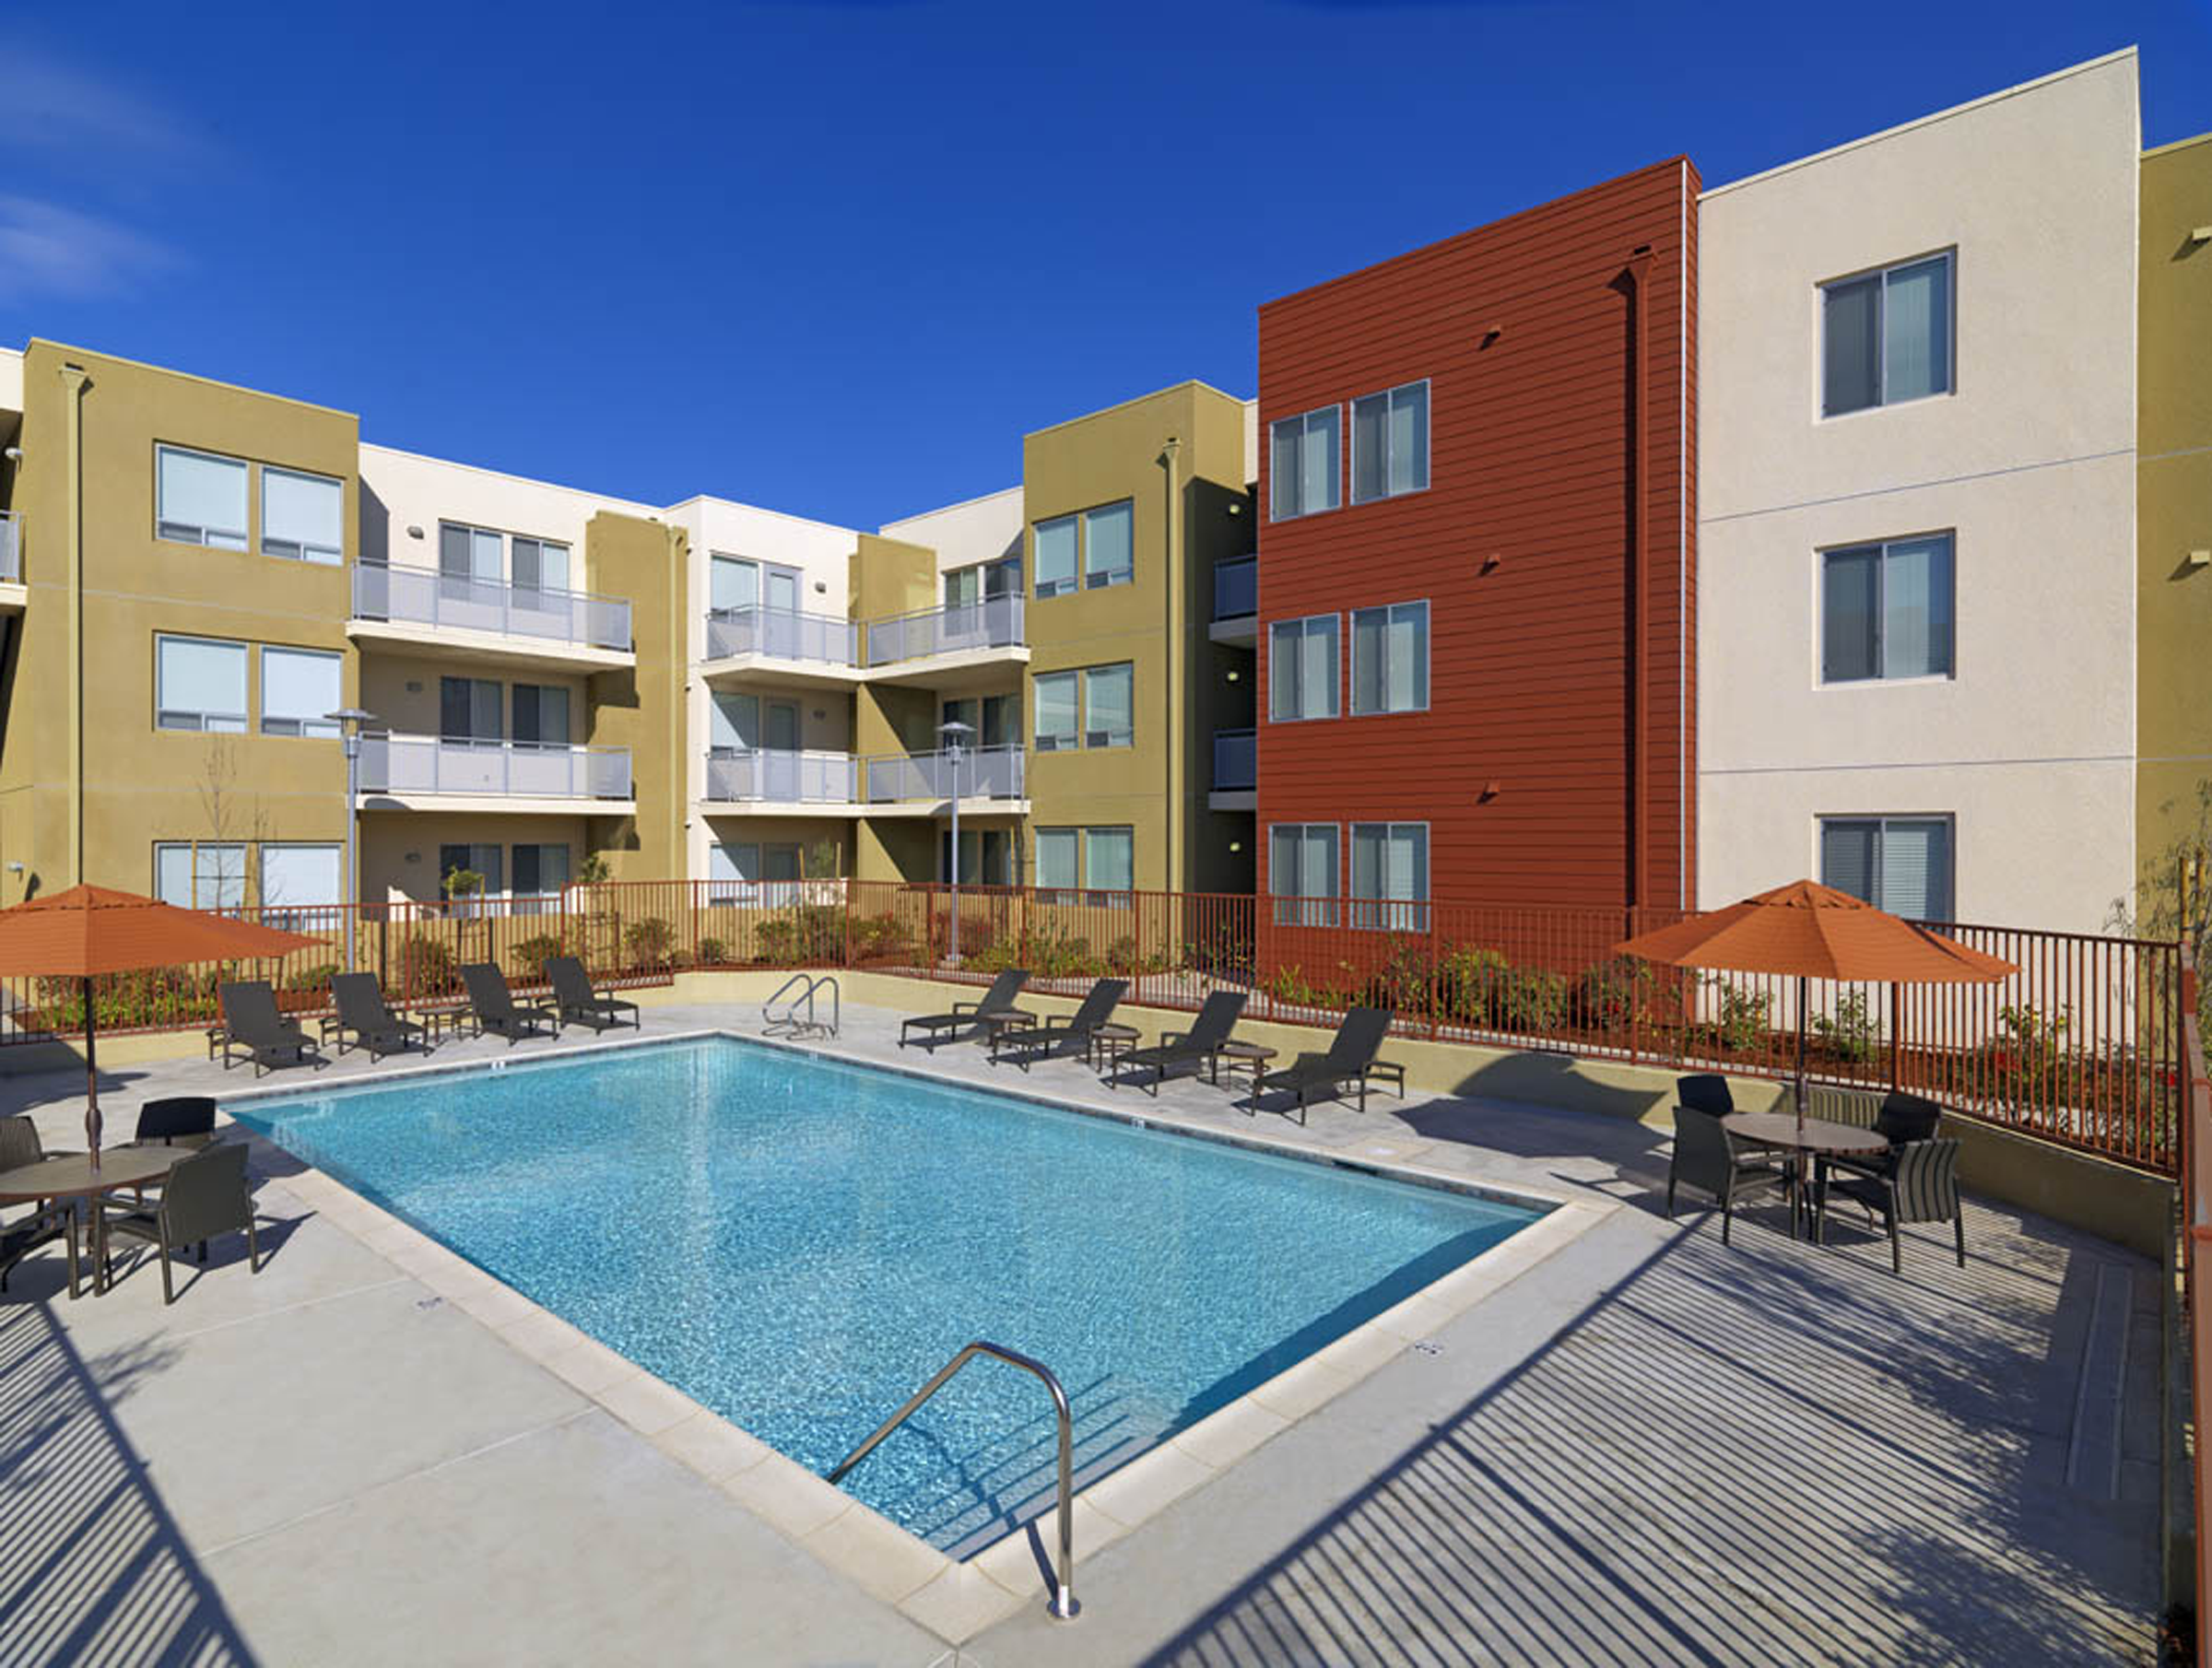 Gated pool and communal chairs in courtyard at Vista Del Cielo Family Housing development